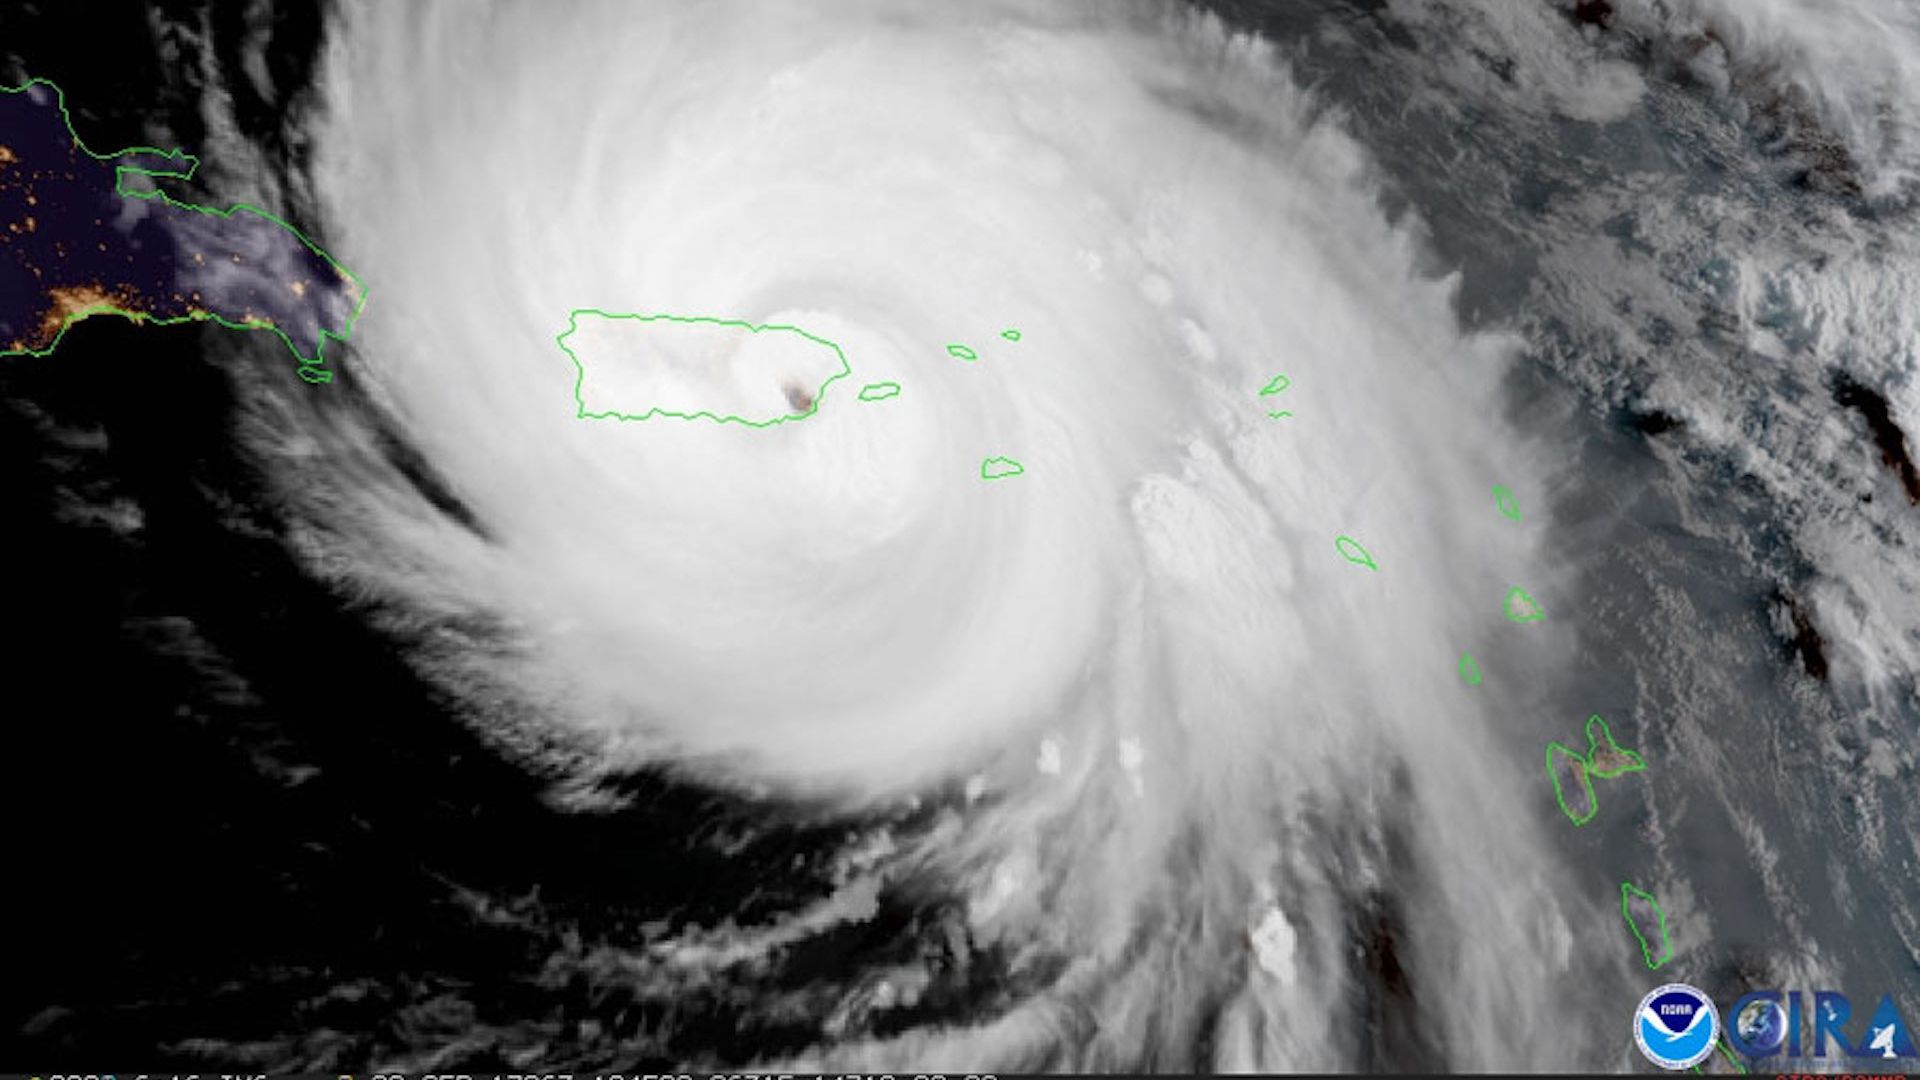 Satellite image showing Hurricane Maria striking Puerto Rico as a Category 4 hurricane in September 2017.